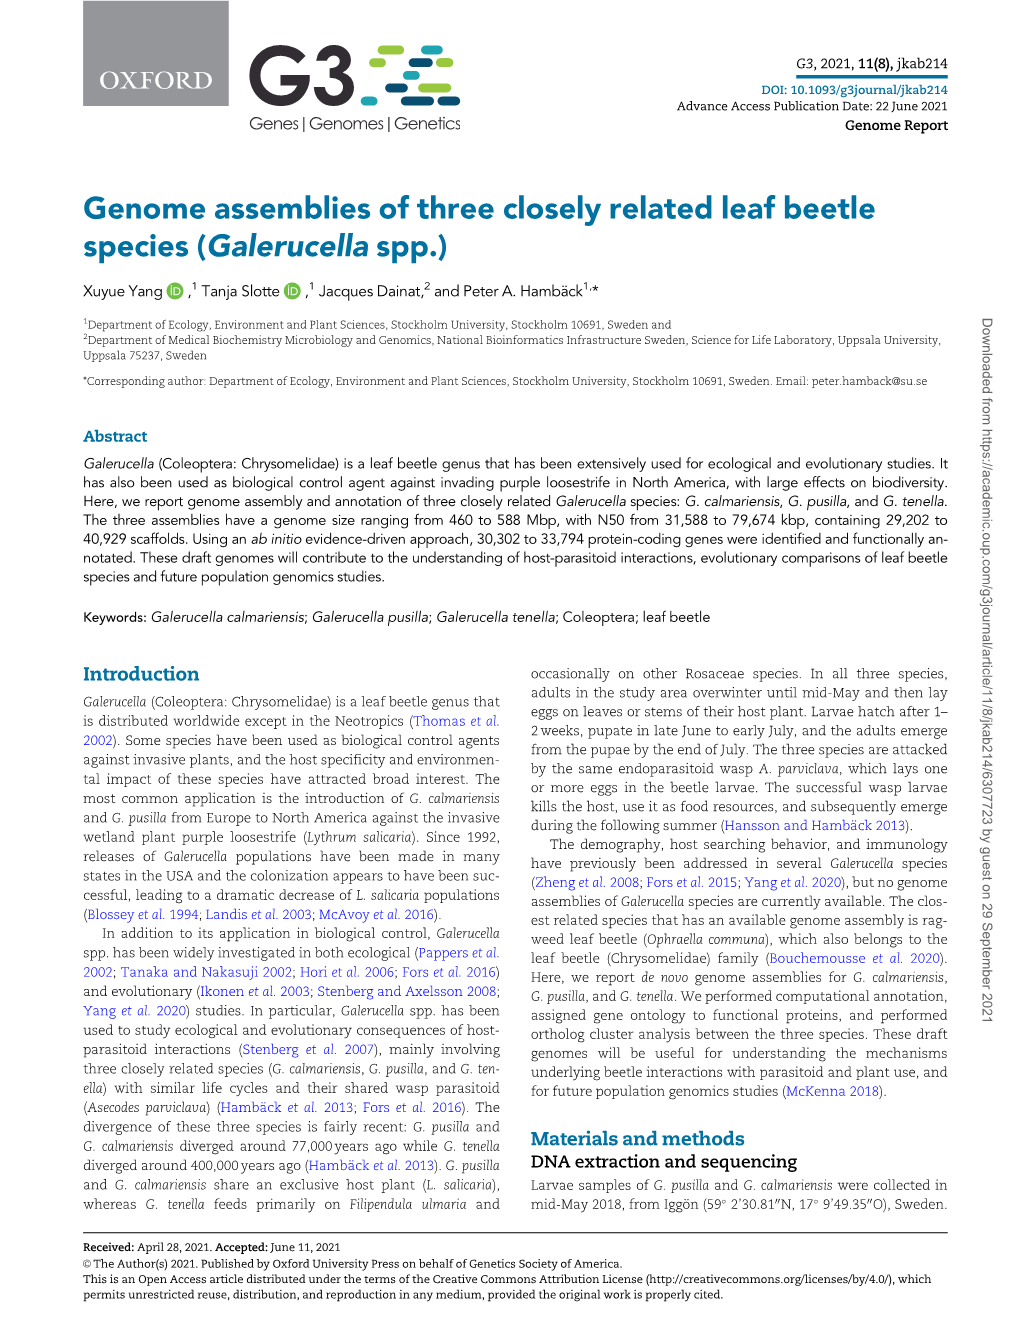 Genome Assemblies of Three Closely Related Leaf Beetle Species (Galerucella Spp.)